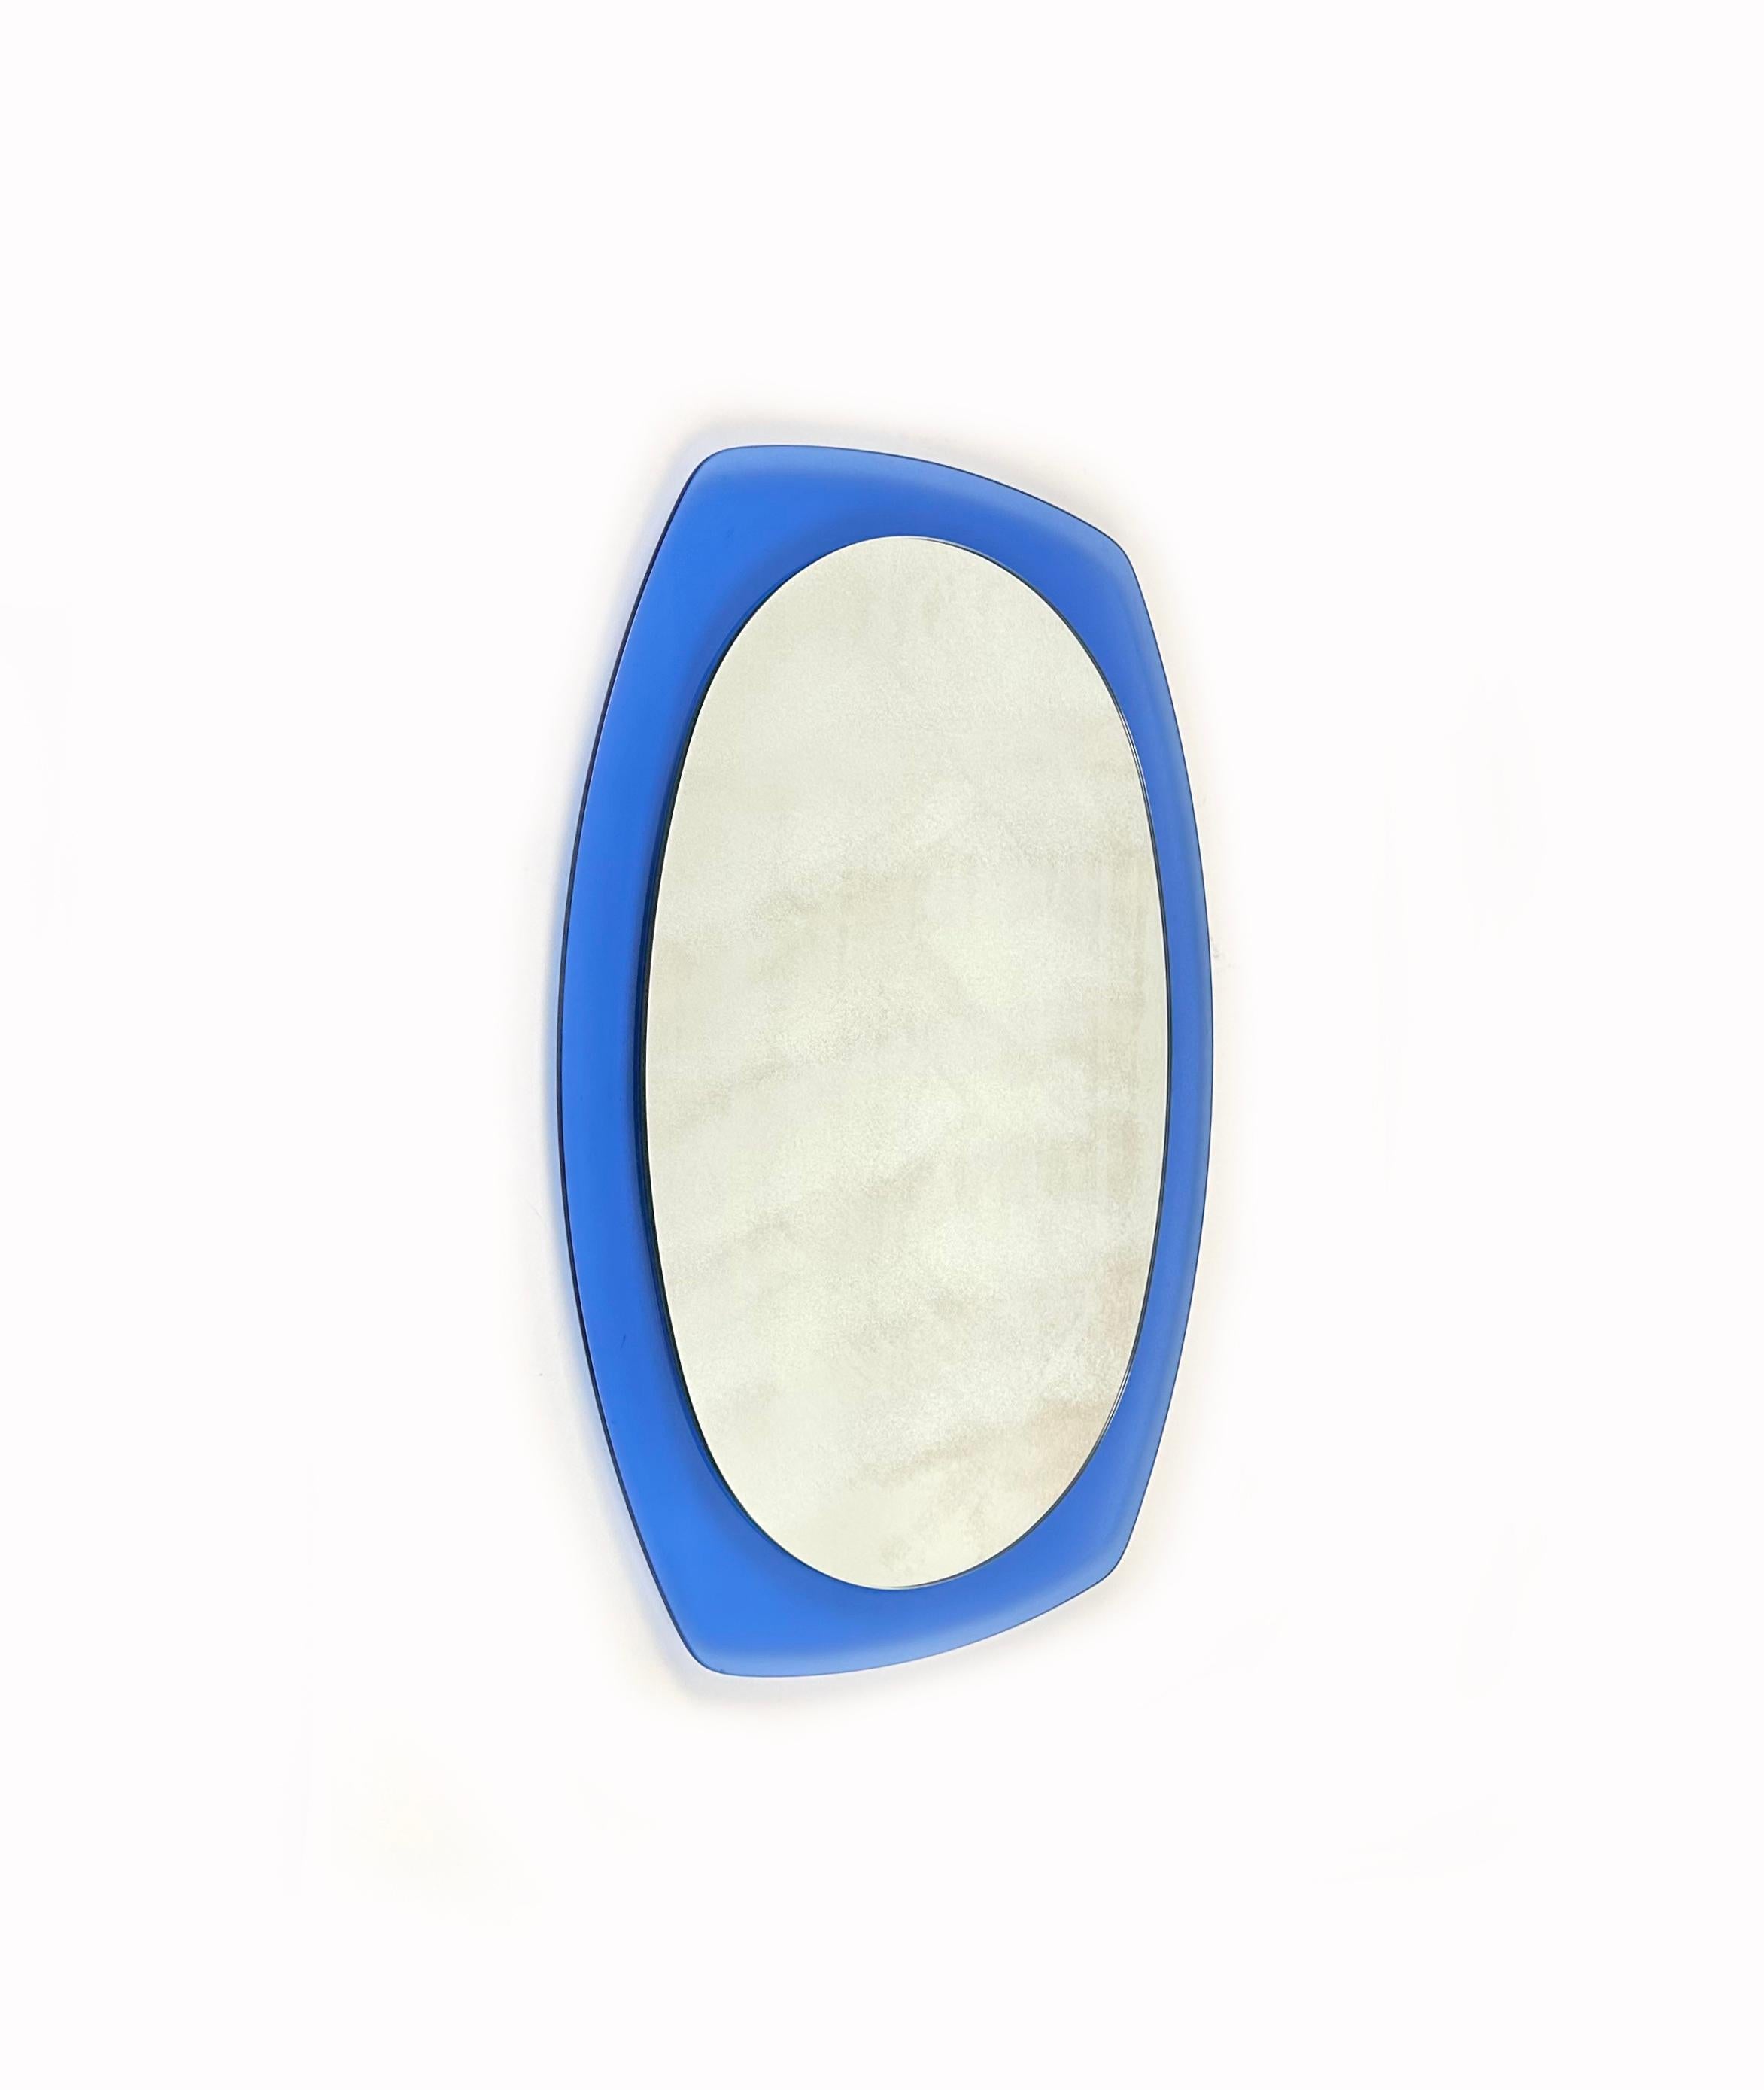 Midcentury Italian mirror, beveled looking glass mounted onto a blue glass.

Made in Italy in the 1970s.

It comes with its original label signed 